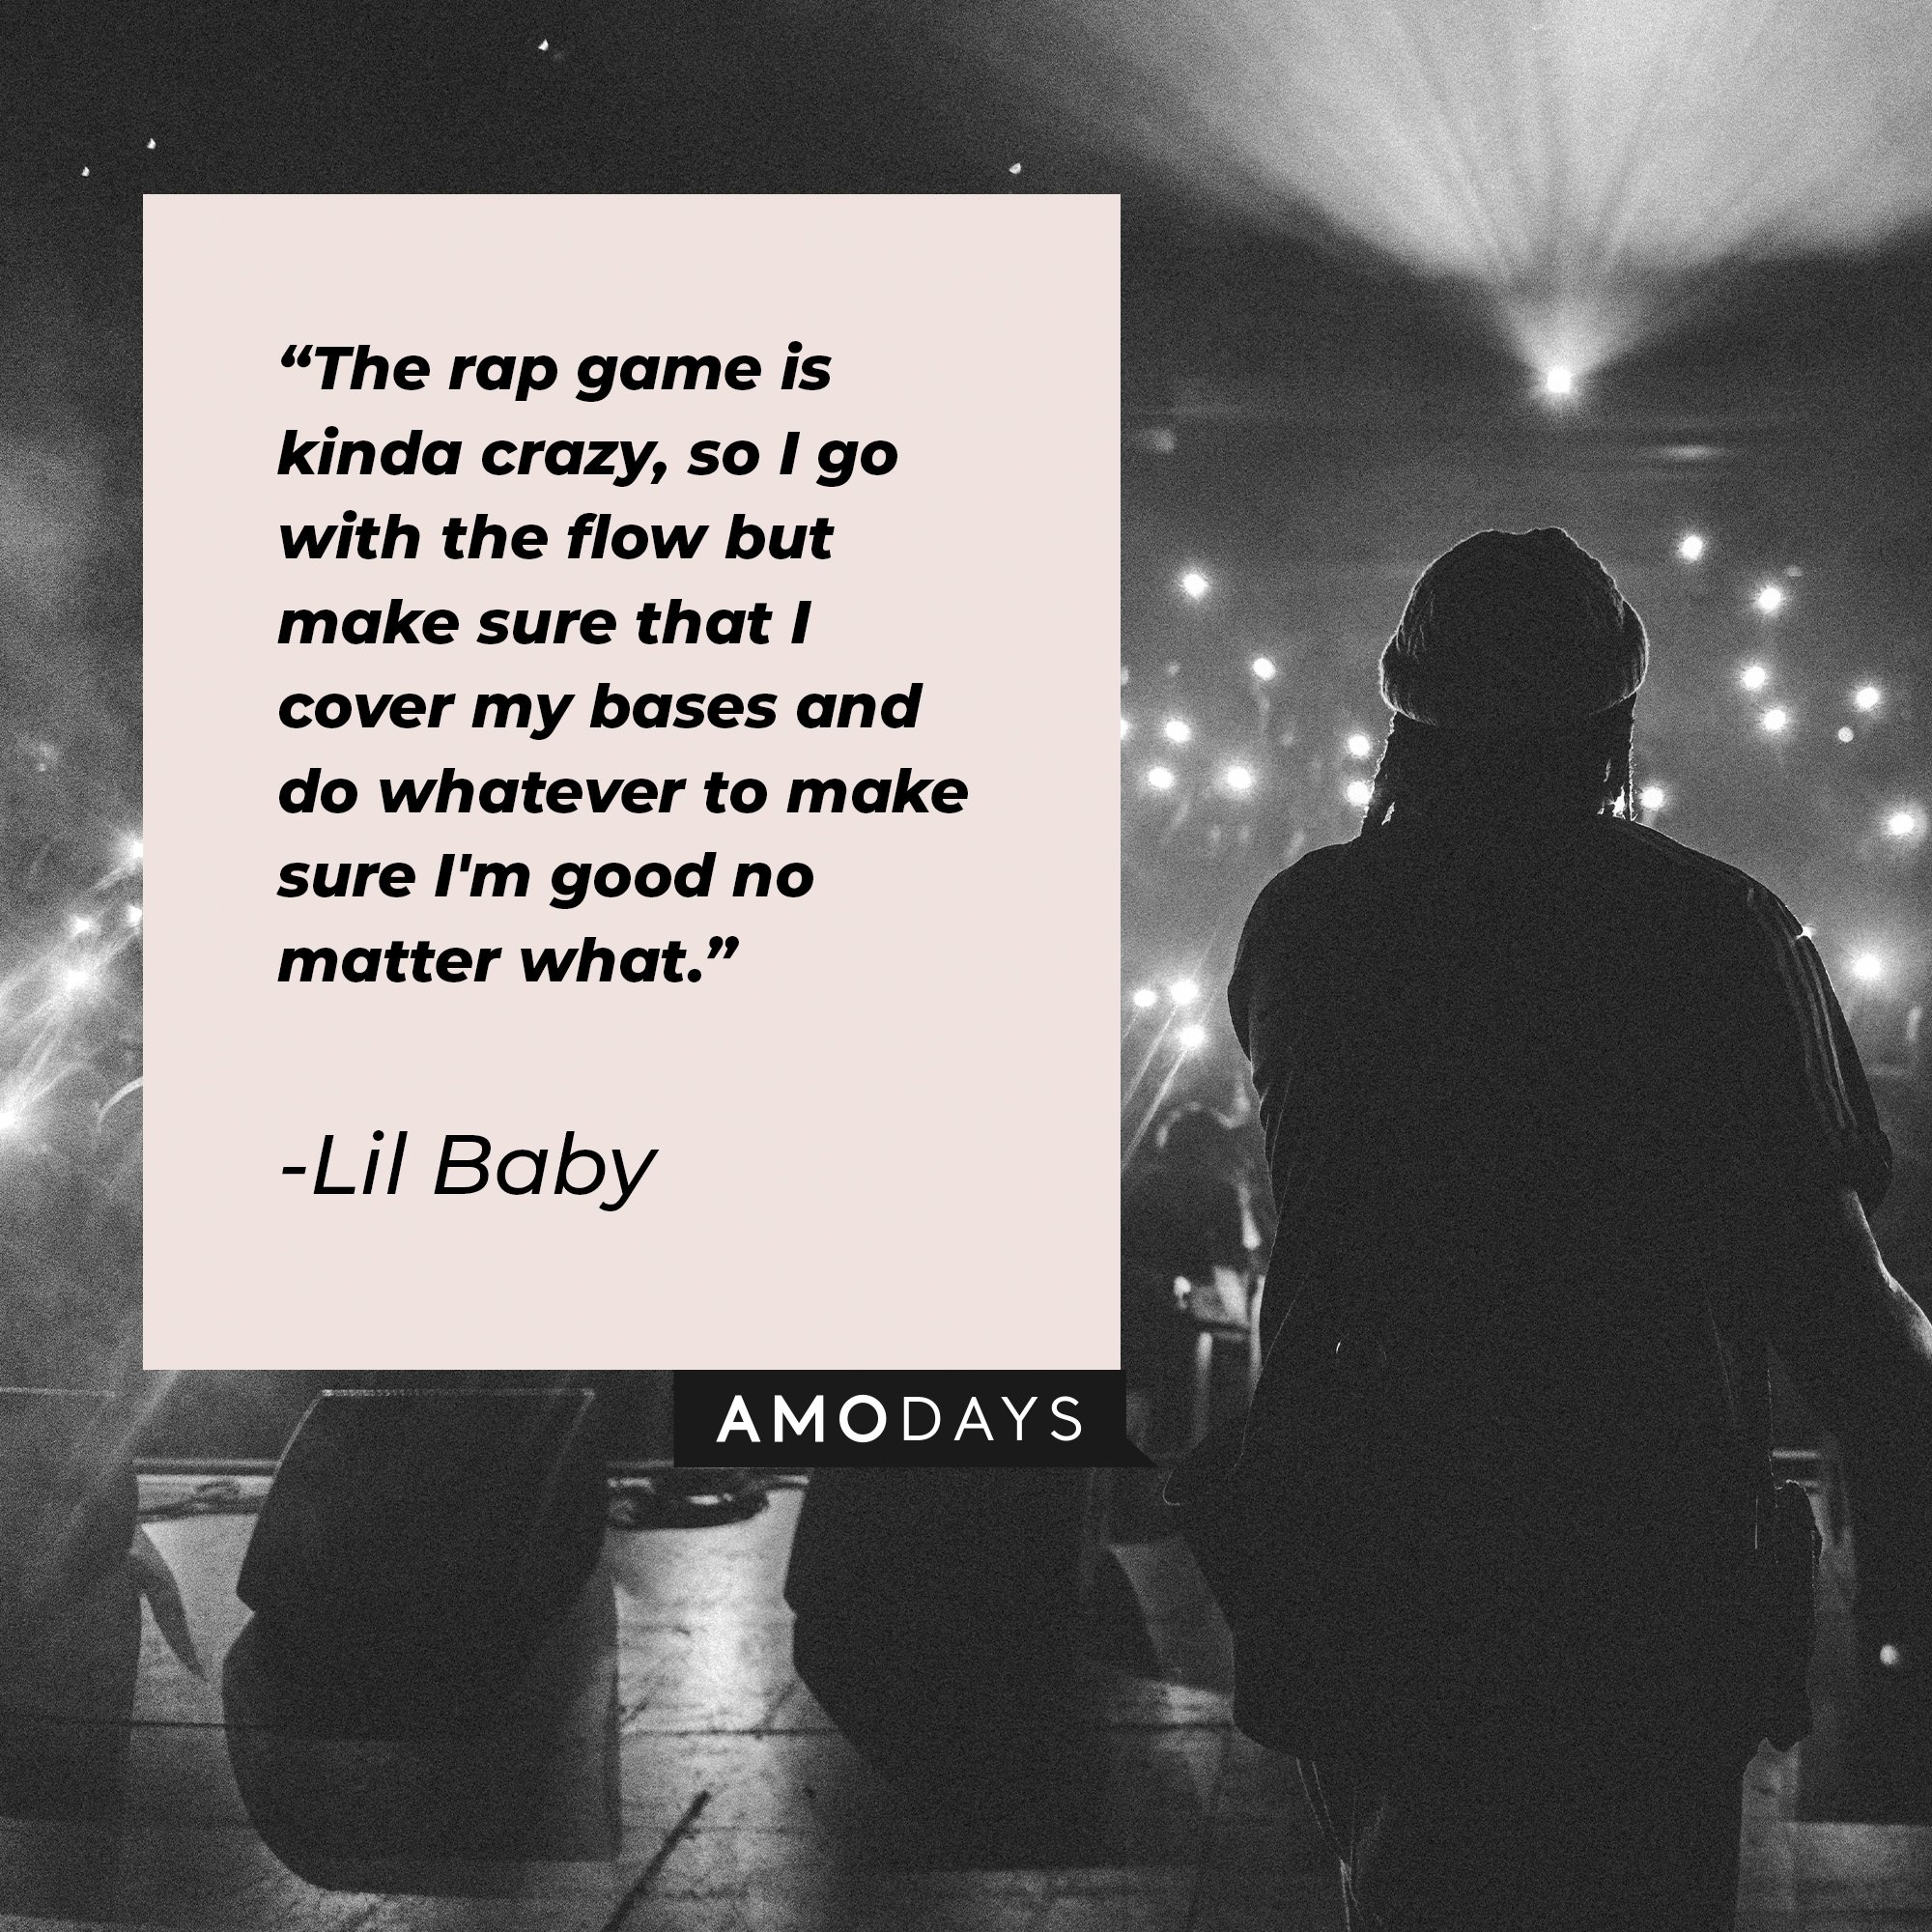 Lil Baby’s quote: “The rap game is kinda crazy, so I go with the flow but make sure that I cover my bases and do whatever to make sure I’m good no matter what.” | Image: AmoDays